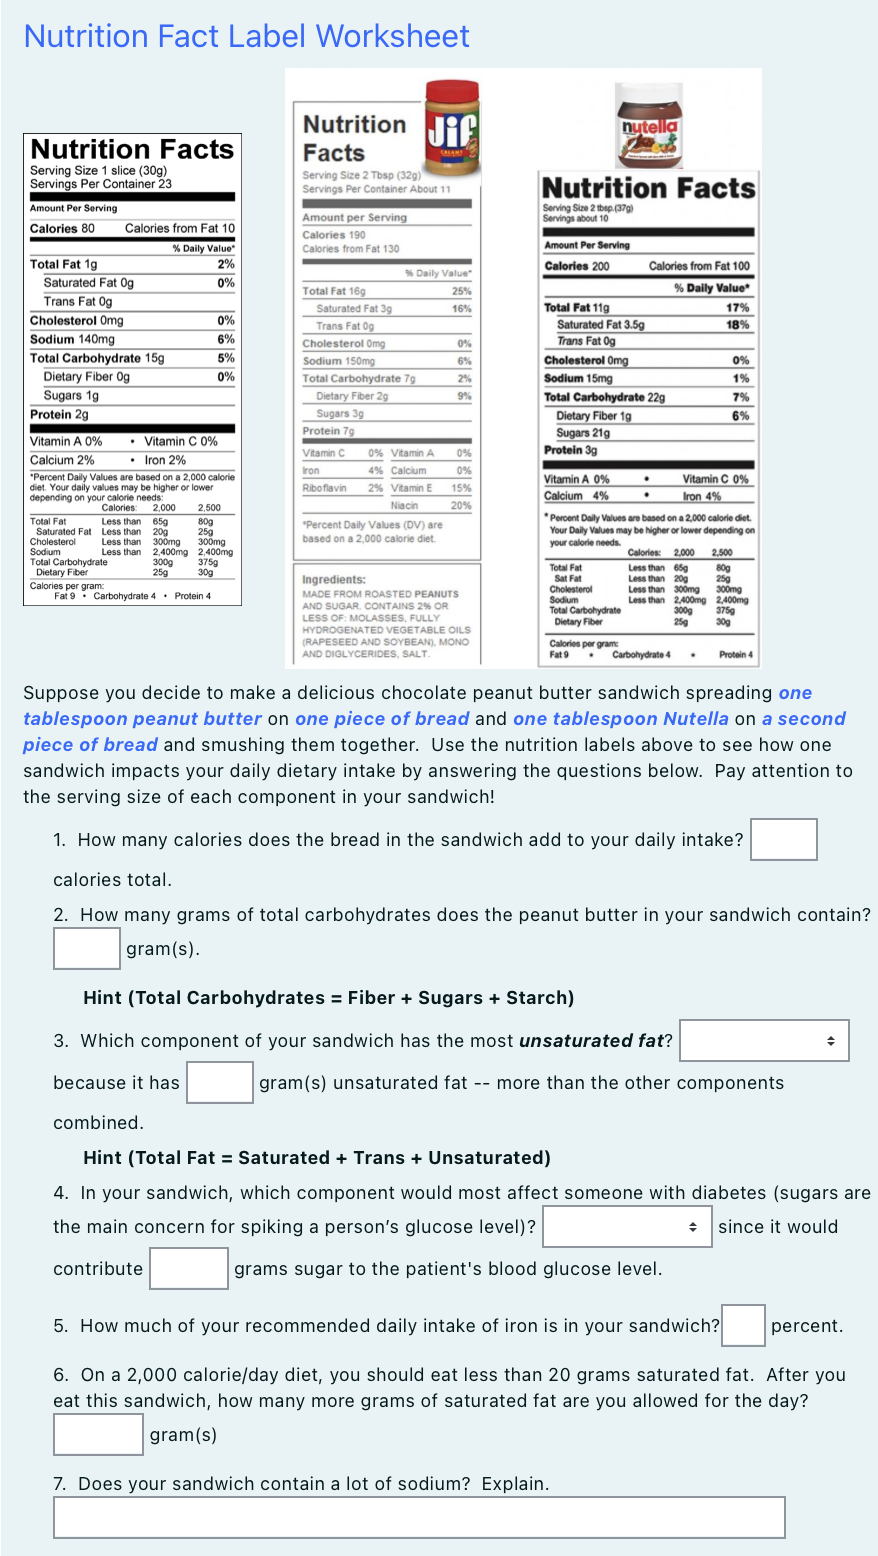 Solved Nutrition Fact Label Worksheet Nutrition Jif Facts  Chegg.com Pertaining To Nutrition Label Worksheet Answers